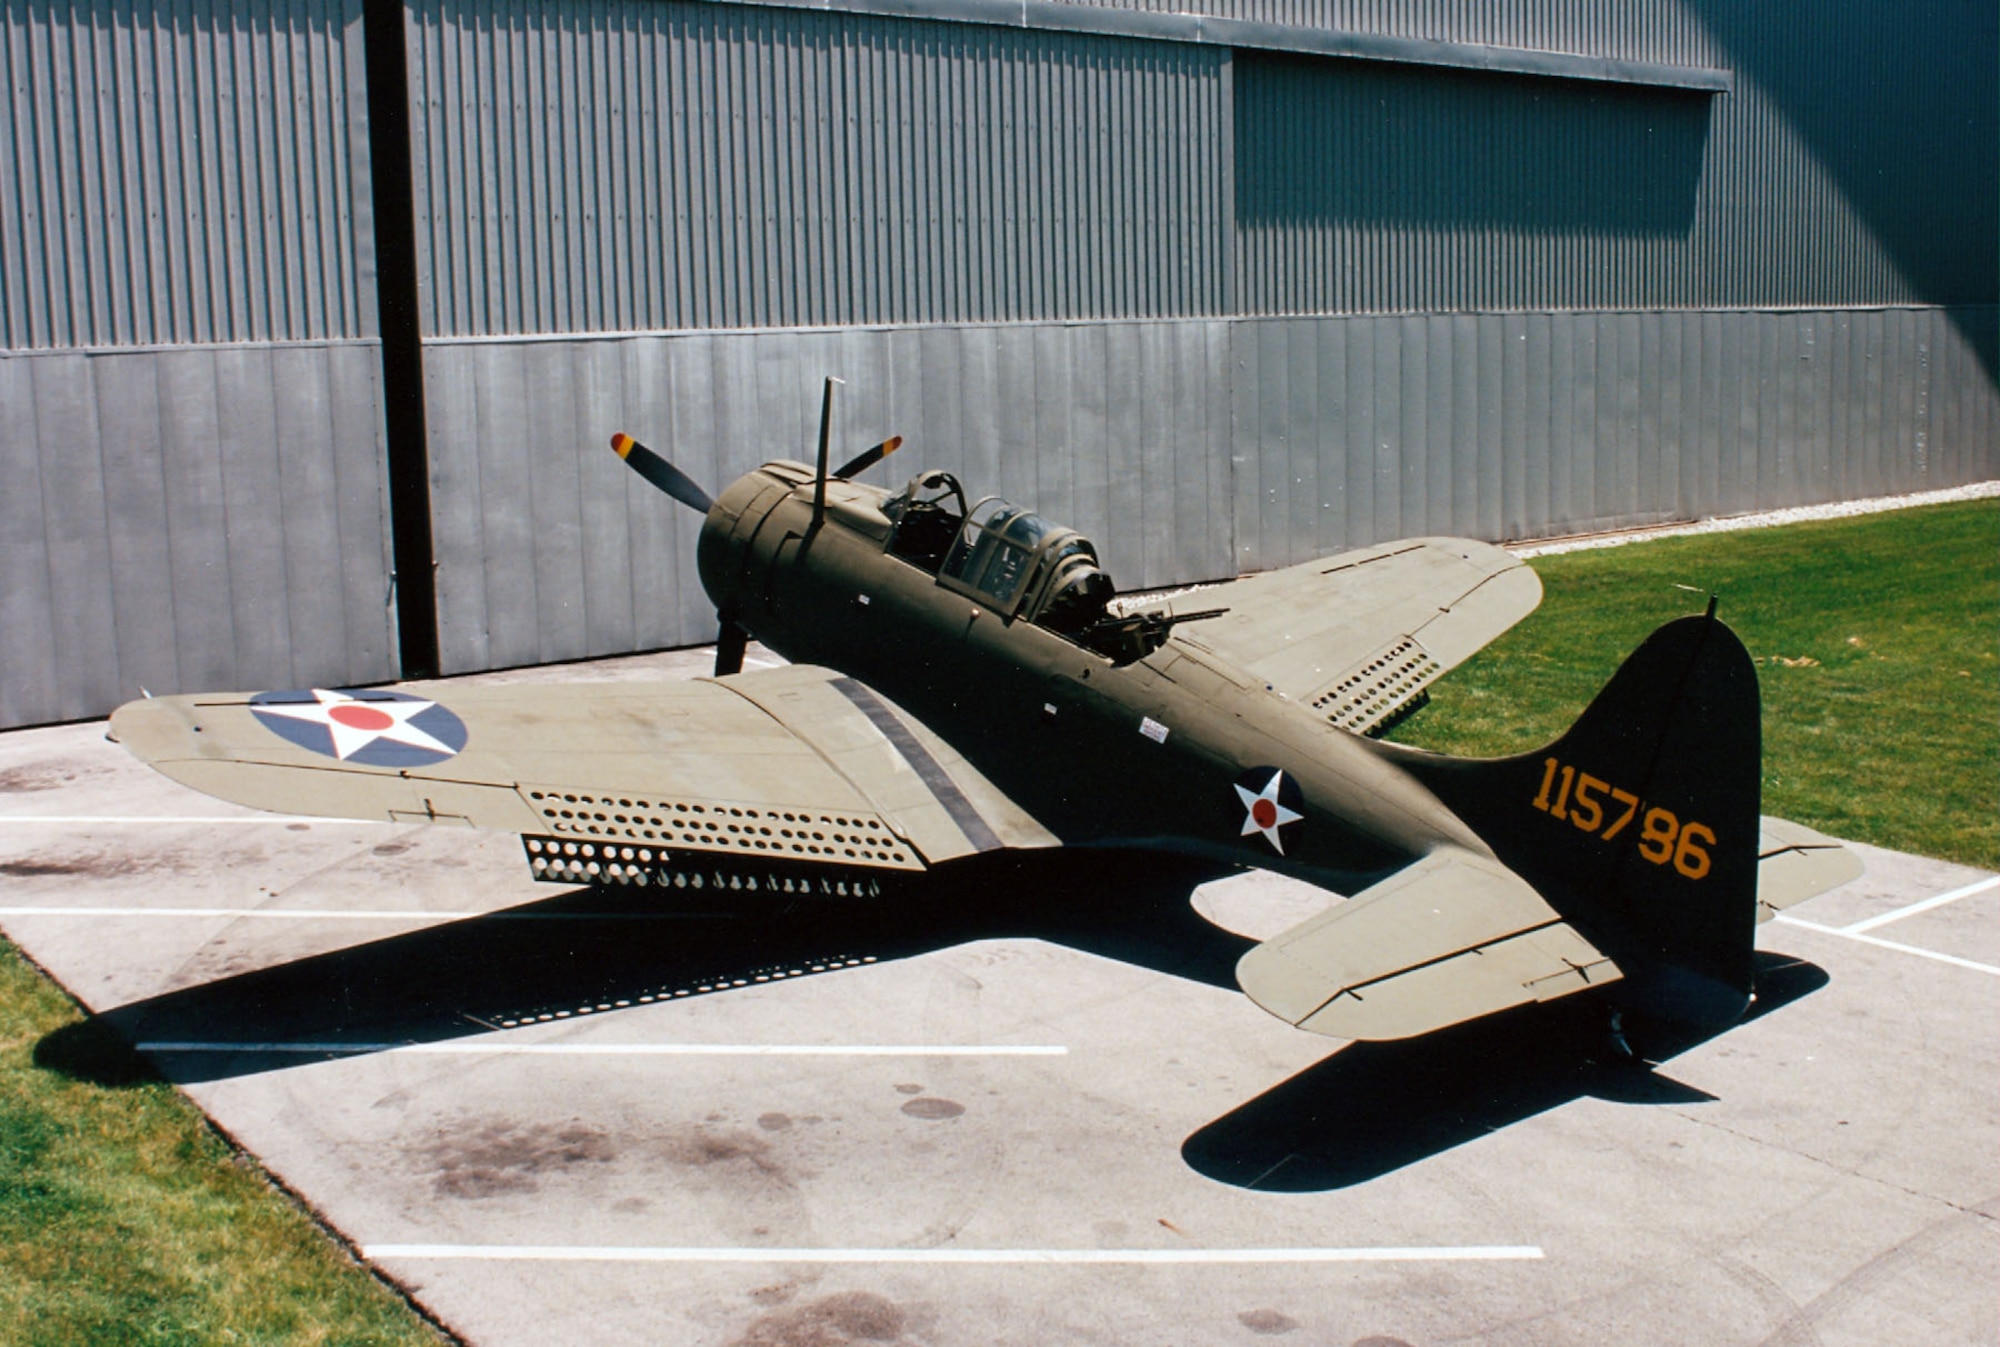 DAYTON, Ohio -- Douglas A-24 at the National Museum of the United States Air Force. (U.S. Air Force photo)